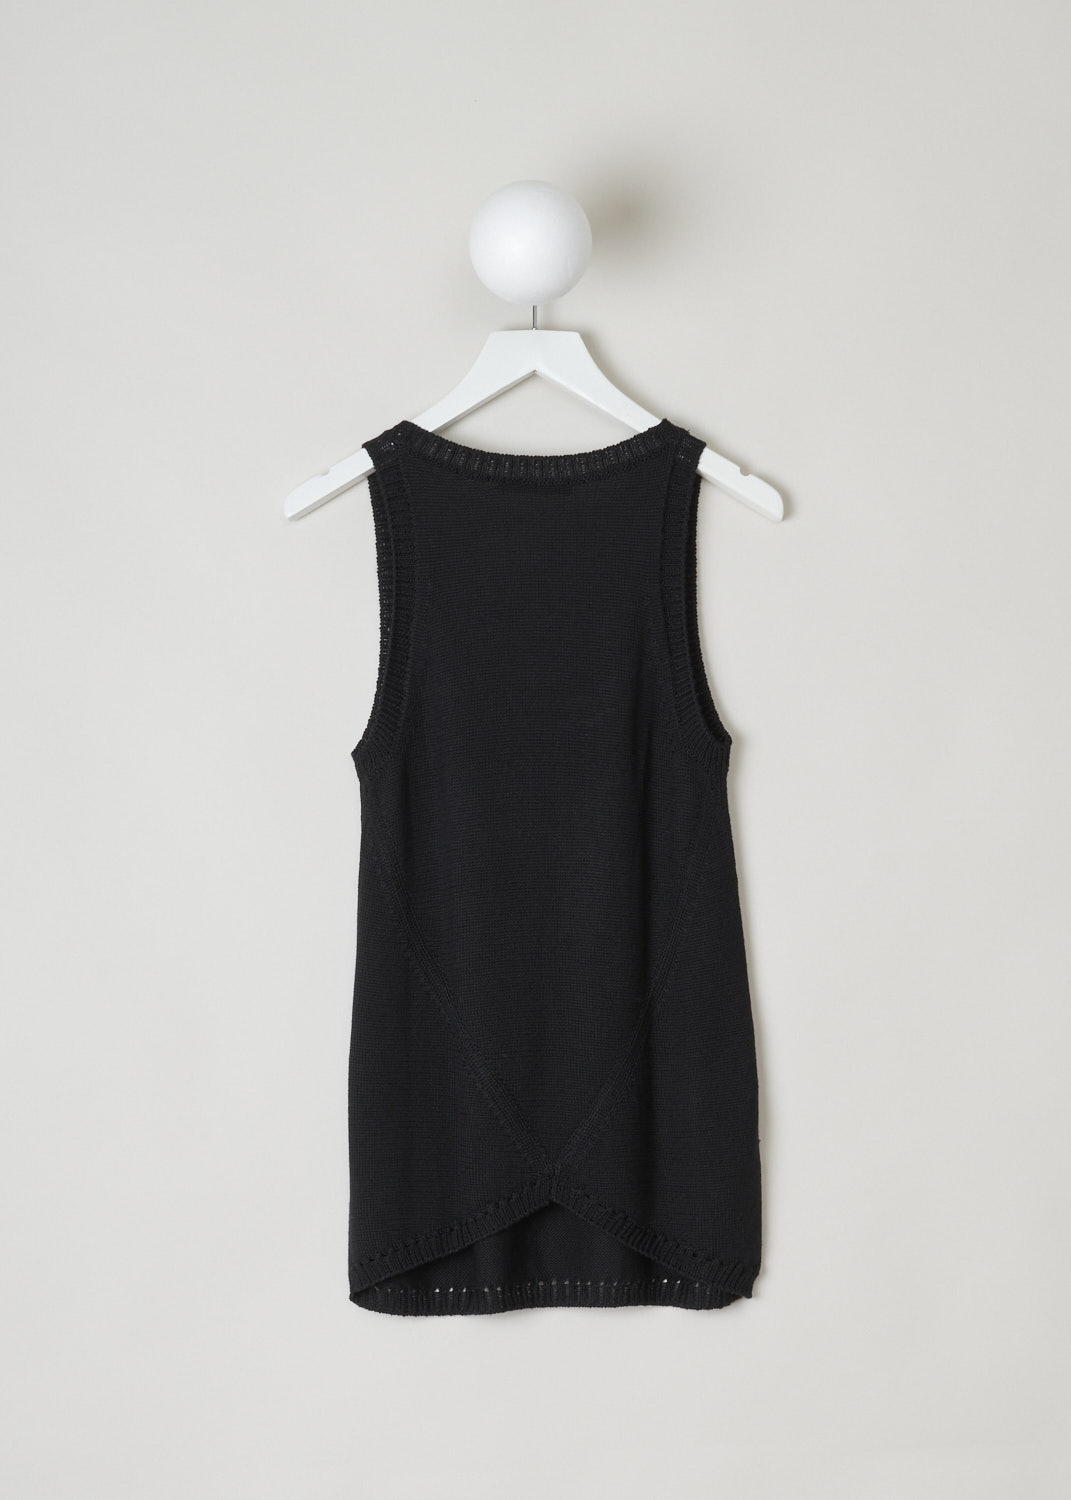 Donna Karan, Black knitted tank top, A14T929Y06_001_black, black, back, Made from a luxurious blended fabric being silk with cashmere. Featuring a scoop neckline with a ribbed edges, the hem is similarly ribbed. Furthermore, this model is slightly asymmetric, where the front is left longer than back.  